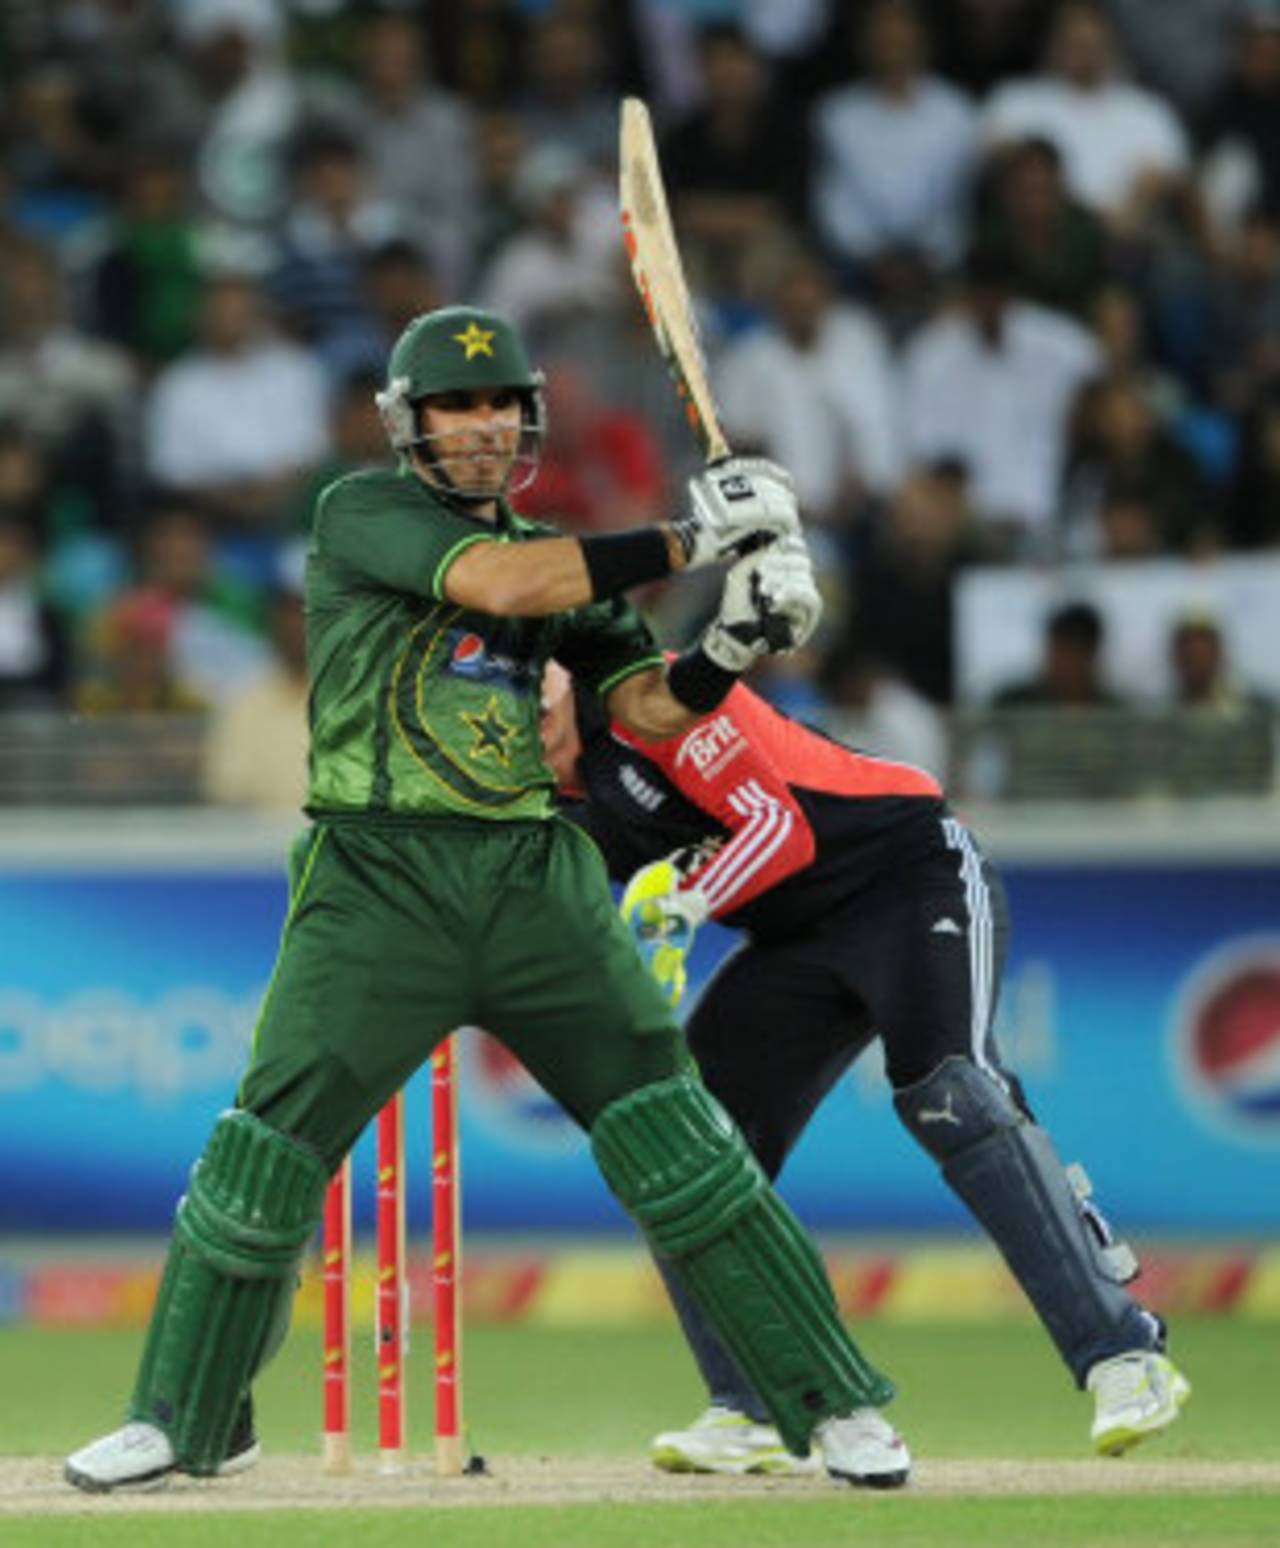 Pakistan captain Misbah-ul-Haq was at his phlegmatic best in marshalling his resources to secure victory&nbsp;&nbsp;&bull;&nbsp;&nbsp;Getty Images